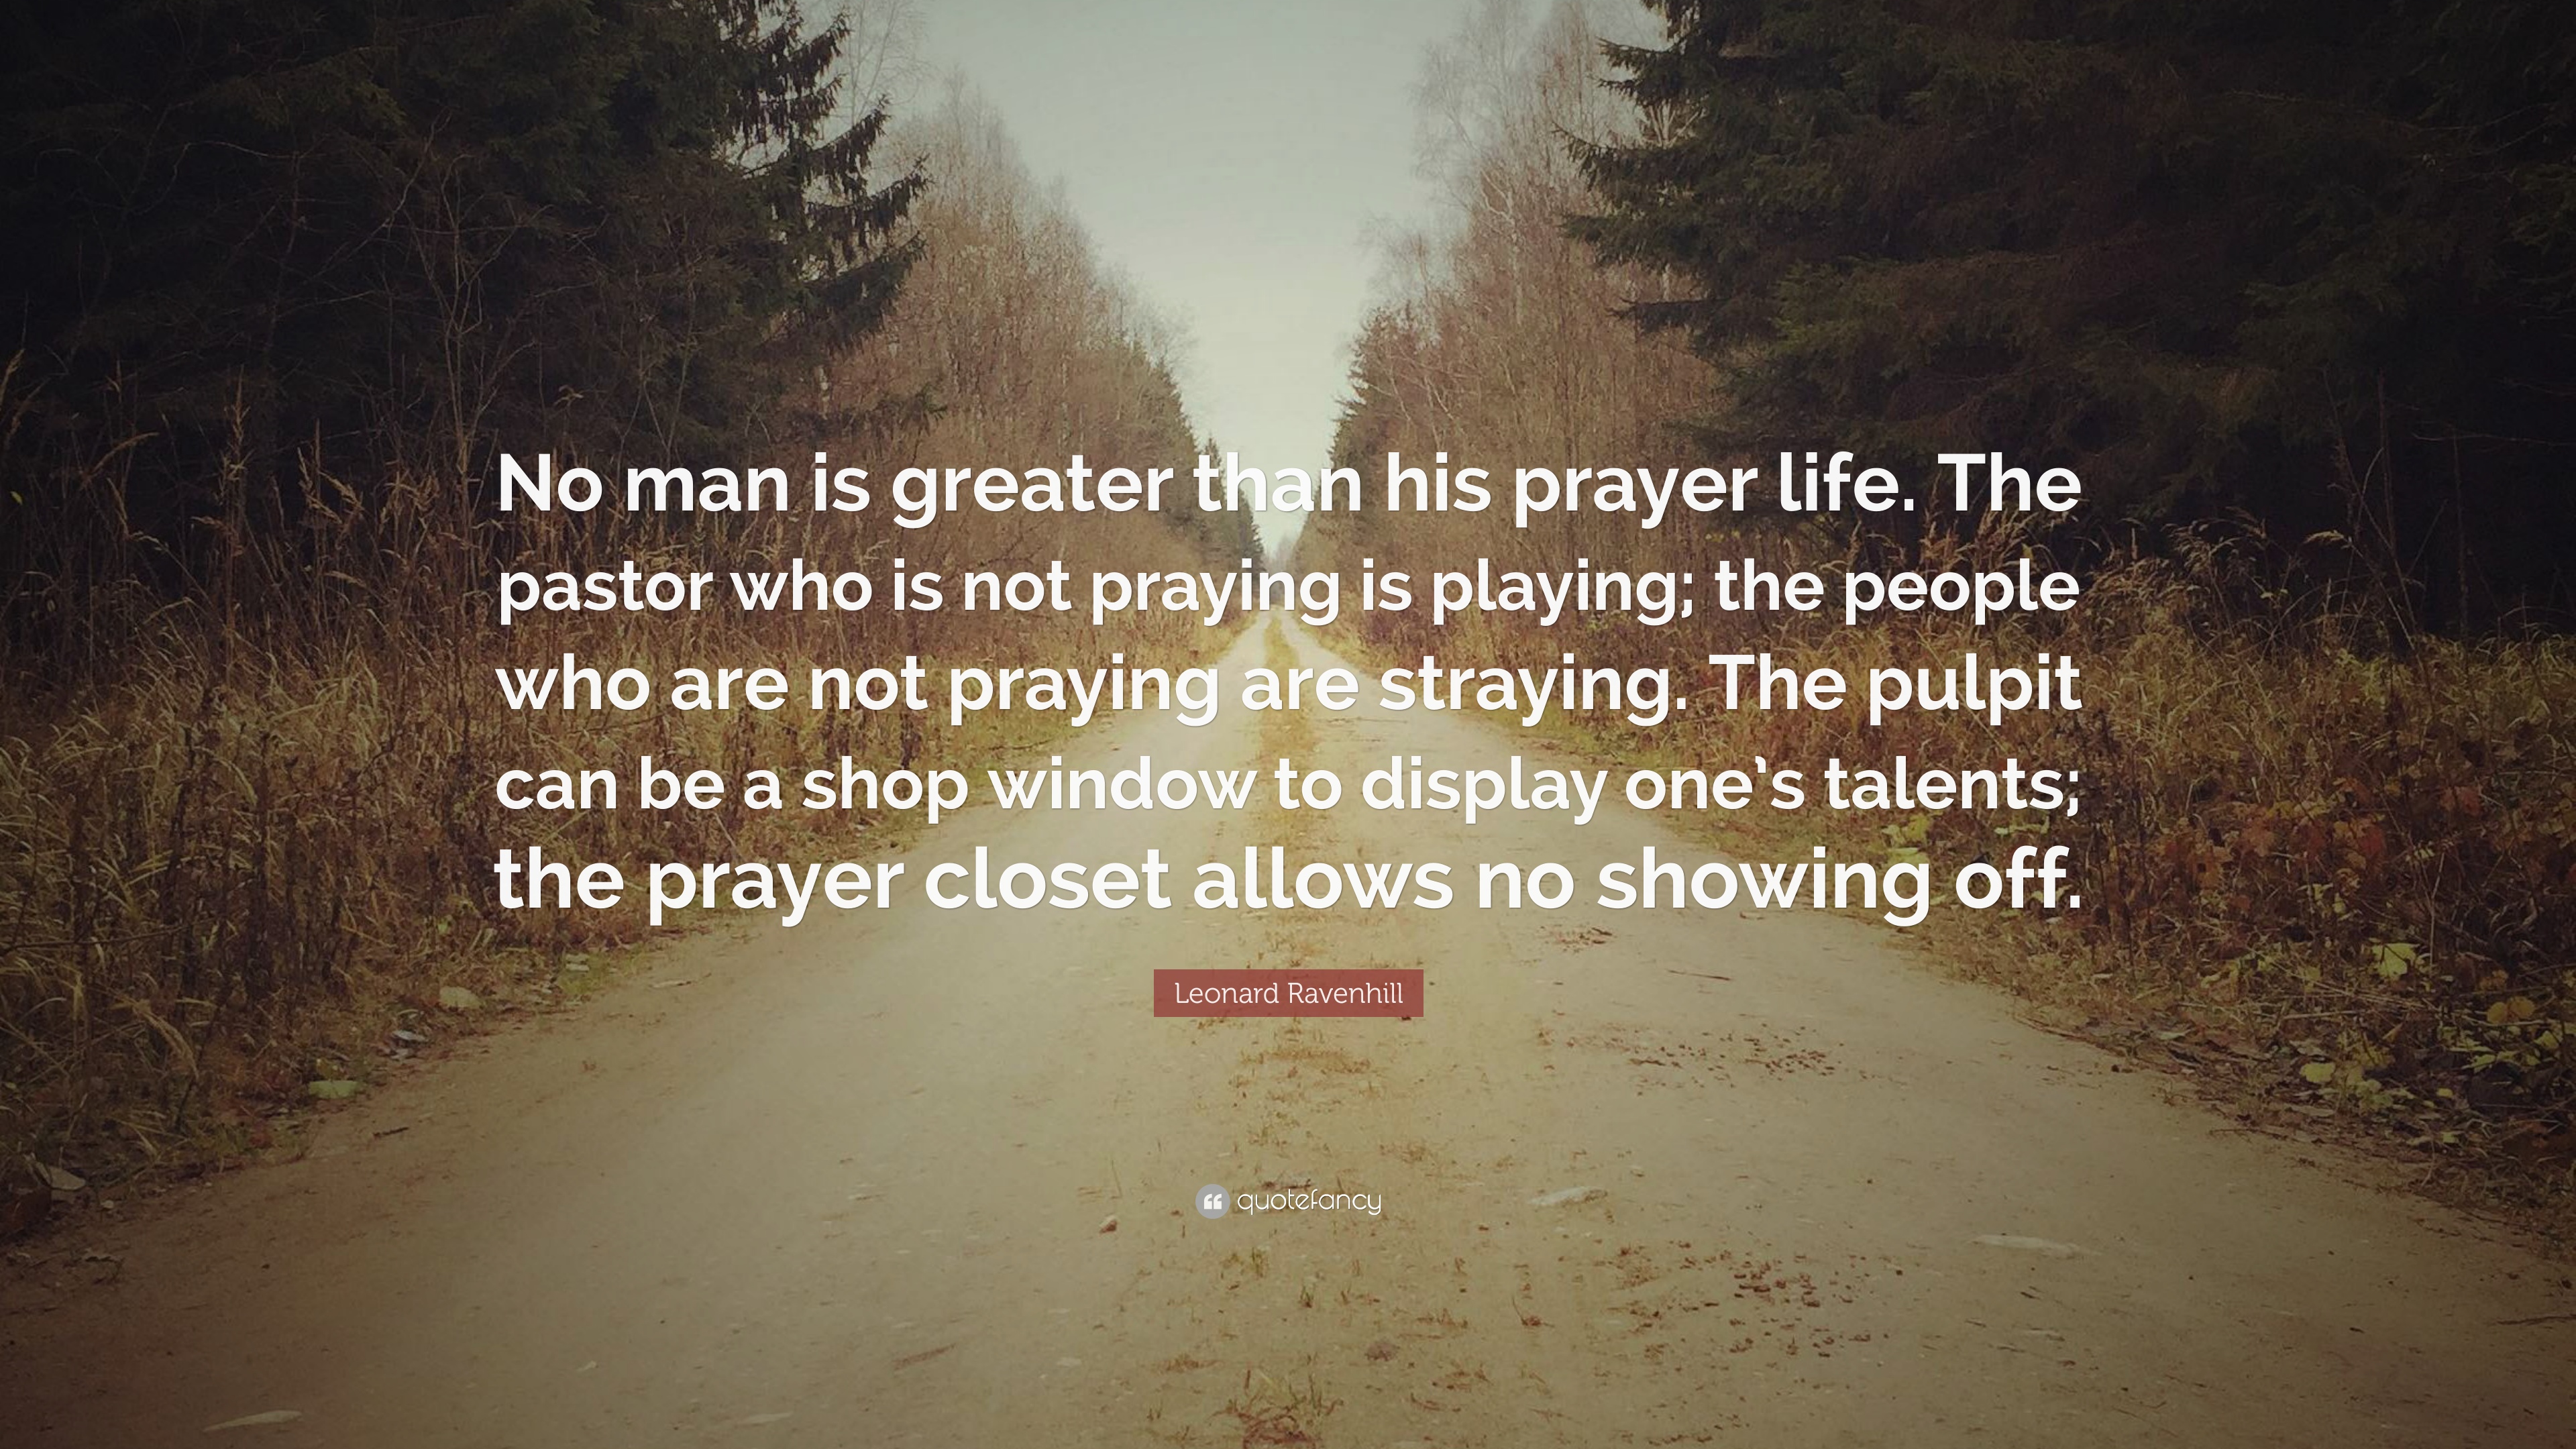 Leonard Ravenhill Quote: “No man is greater than his prayer life